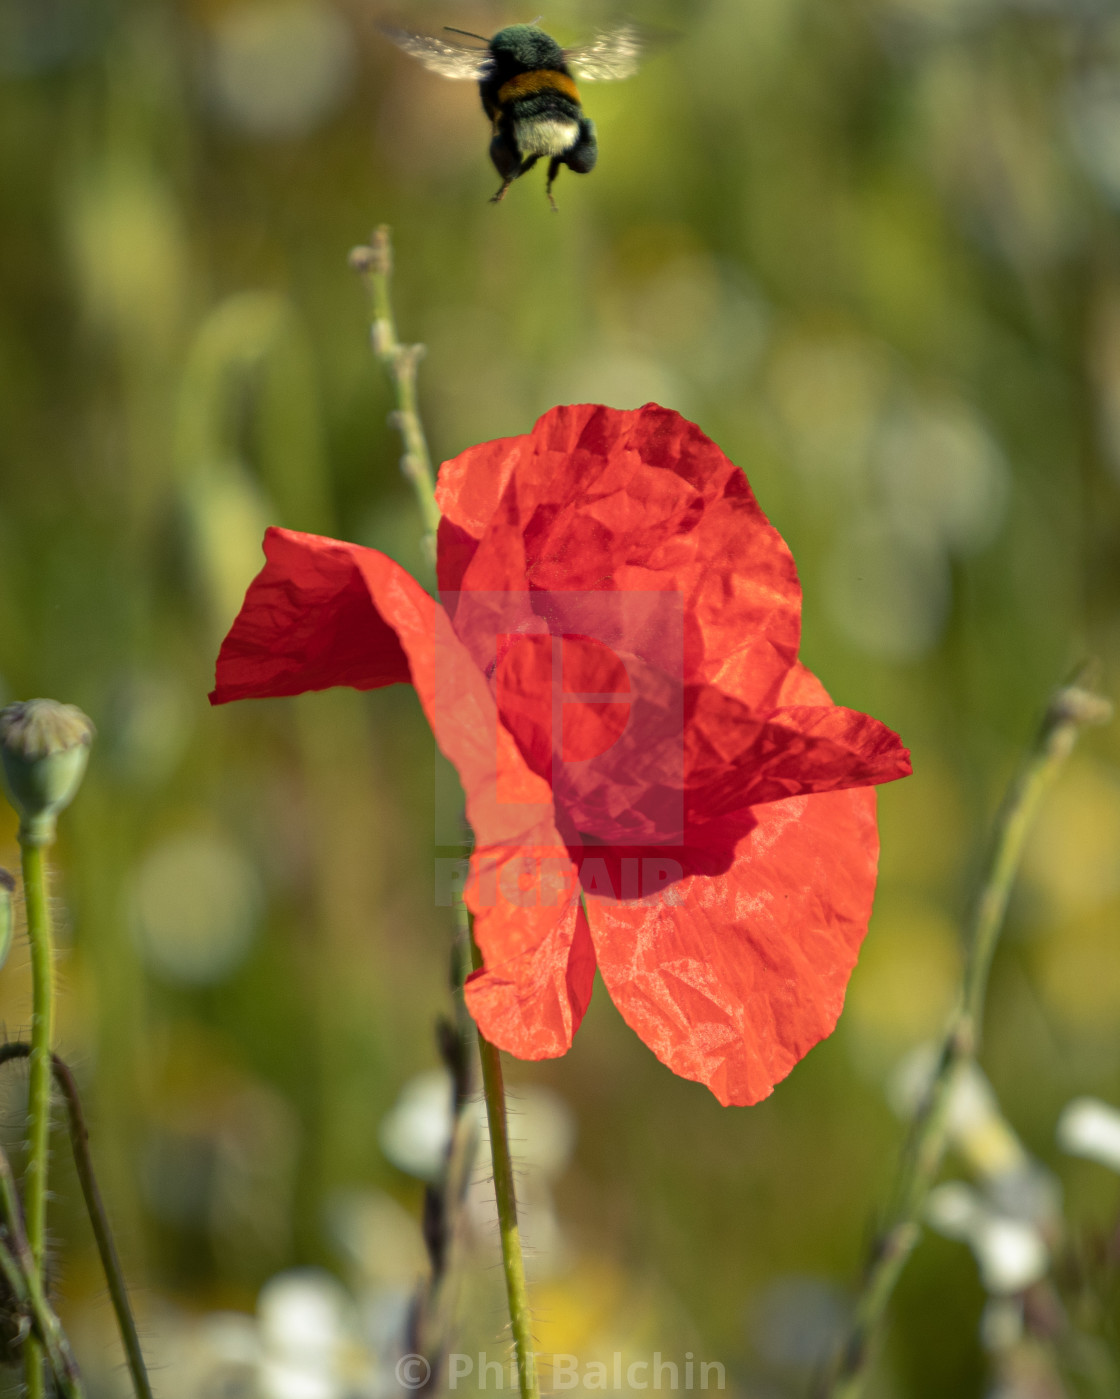 "A Poppy Field in the English springtime" stock image